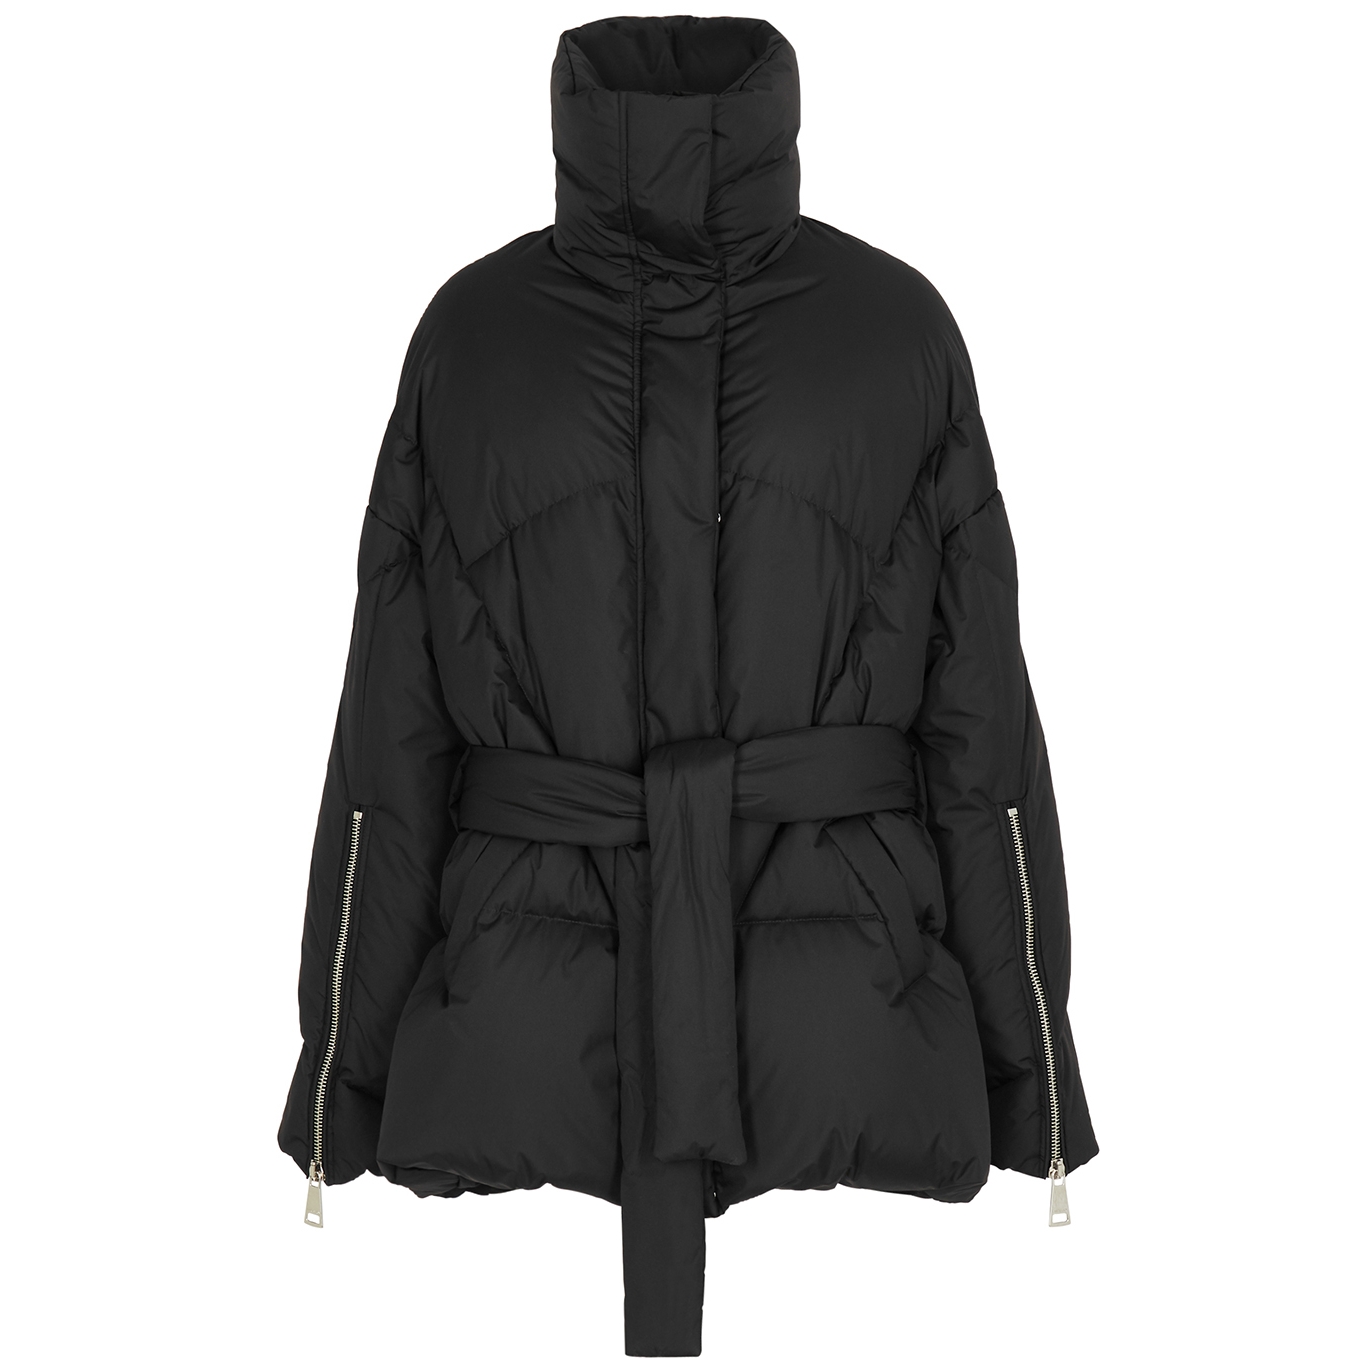 KhrisJoy Black Quilted Shell Coat